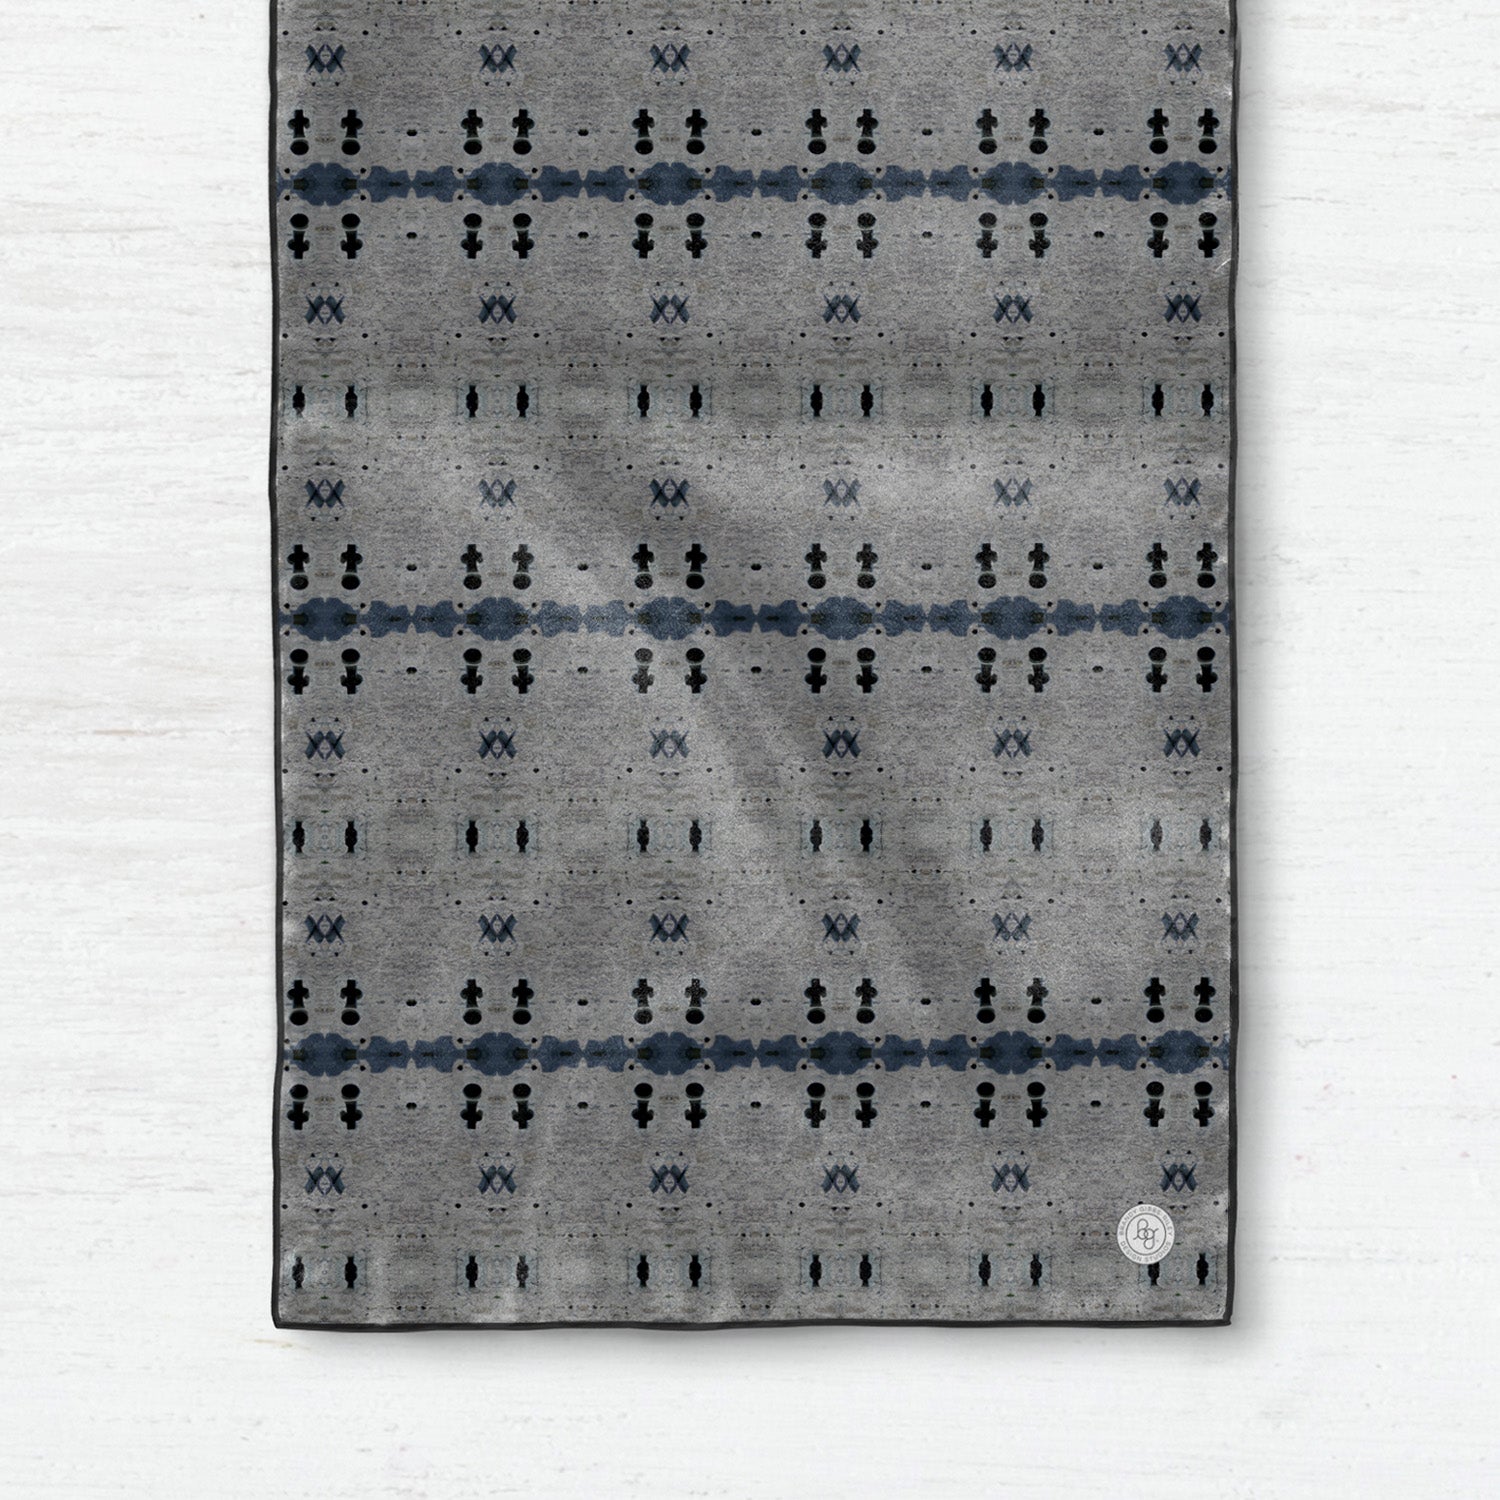 Detail of a silk scarf featuring a gray abstract pattern